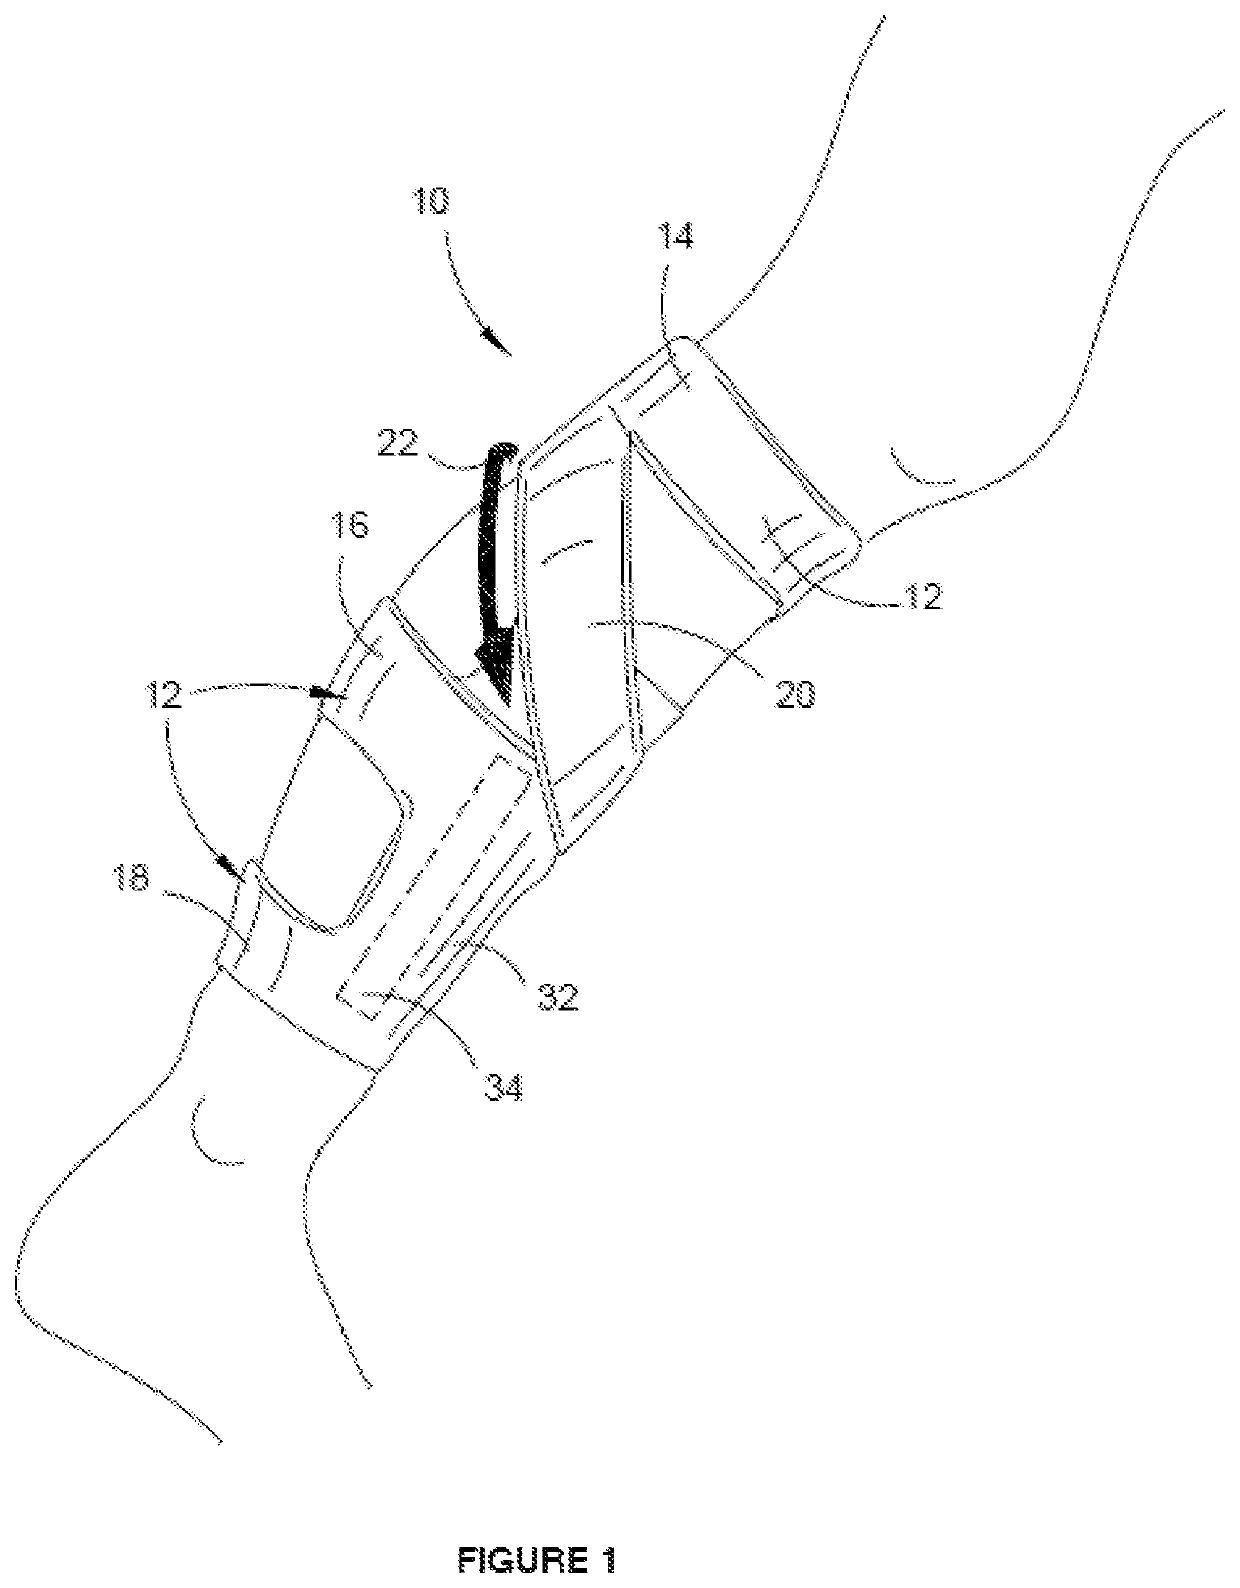 Device for the treatment of medial tibial stress syndrome and other conditions of the lower leg